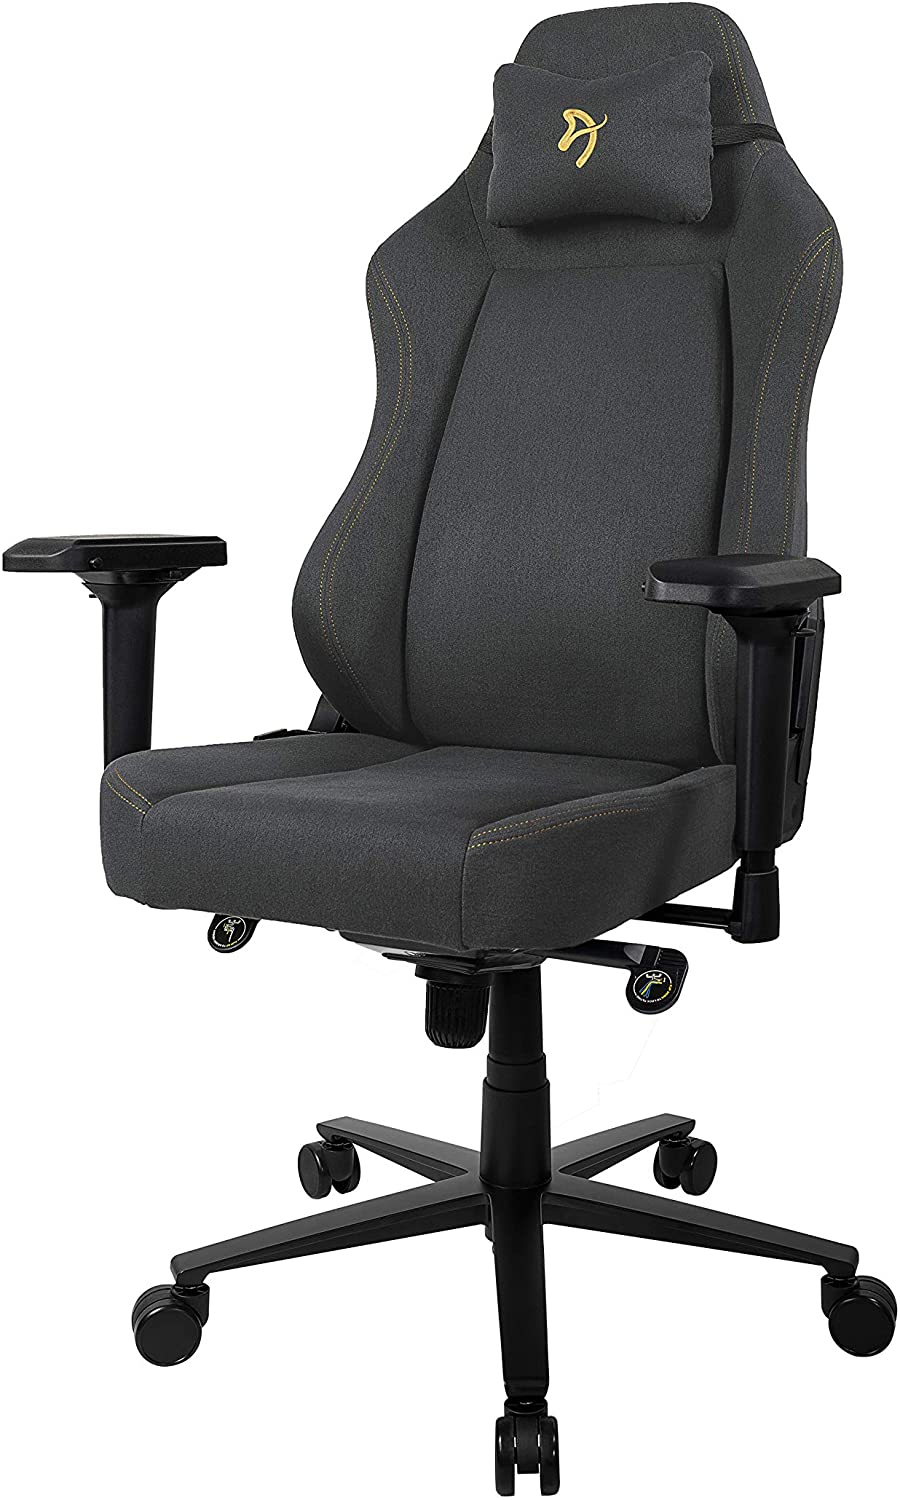 Arozzi Primo Gaming Chair Mint Green